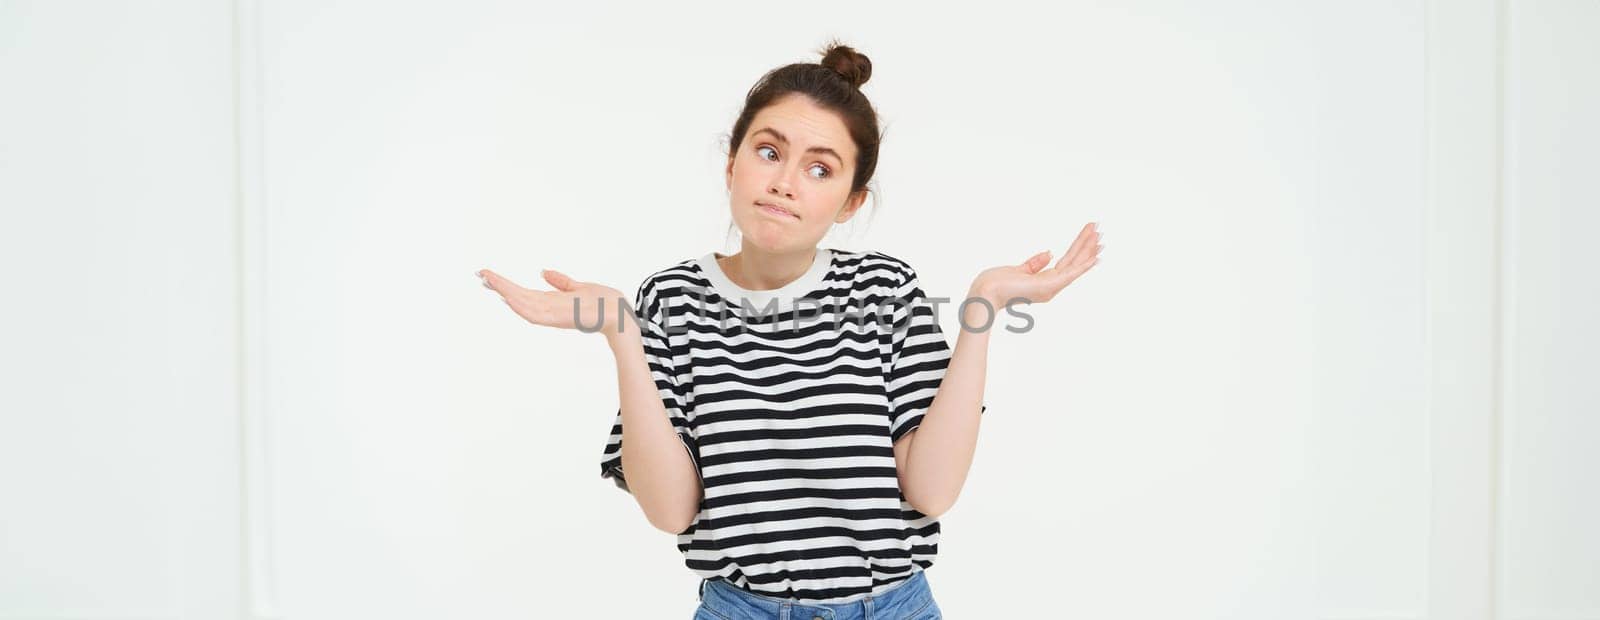 Image of confused brunette girl shrugging shoulders, looks puzzled, isolated over white background.